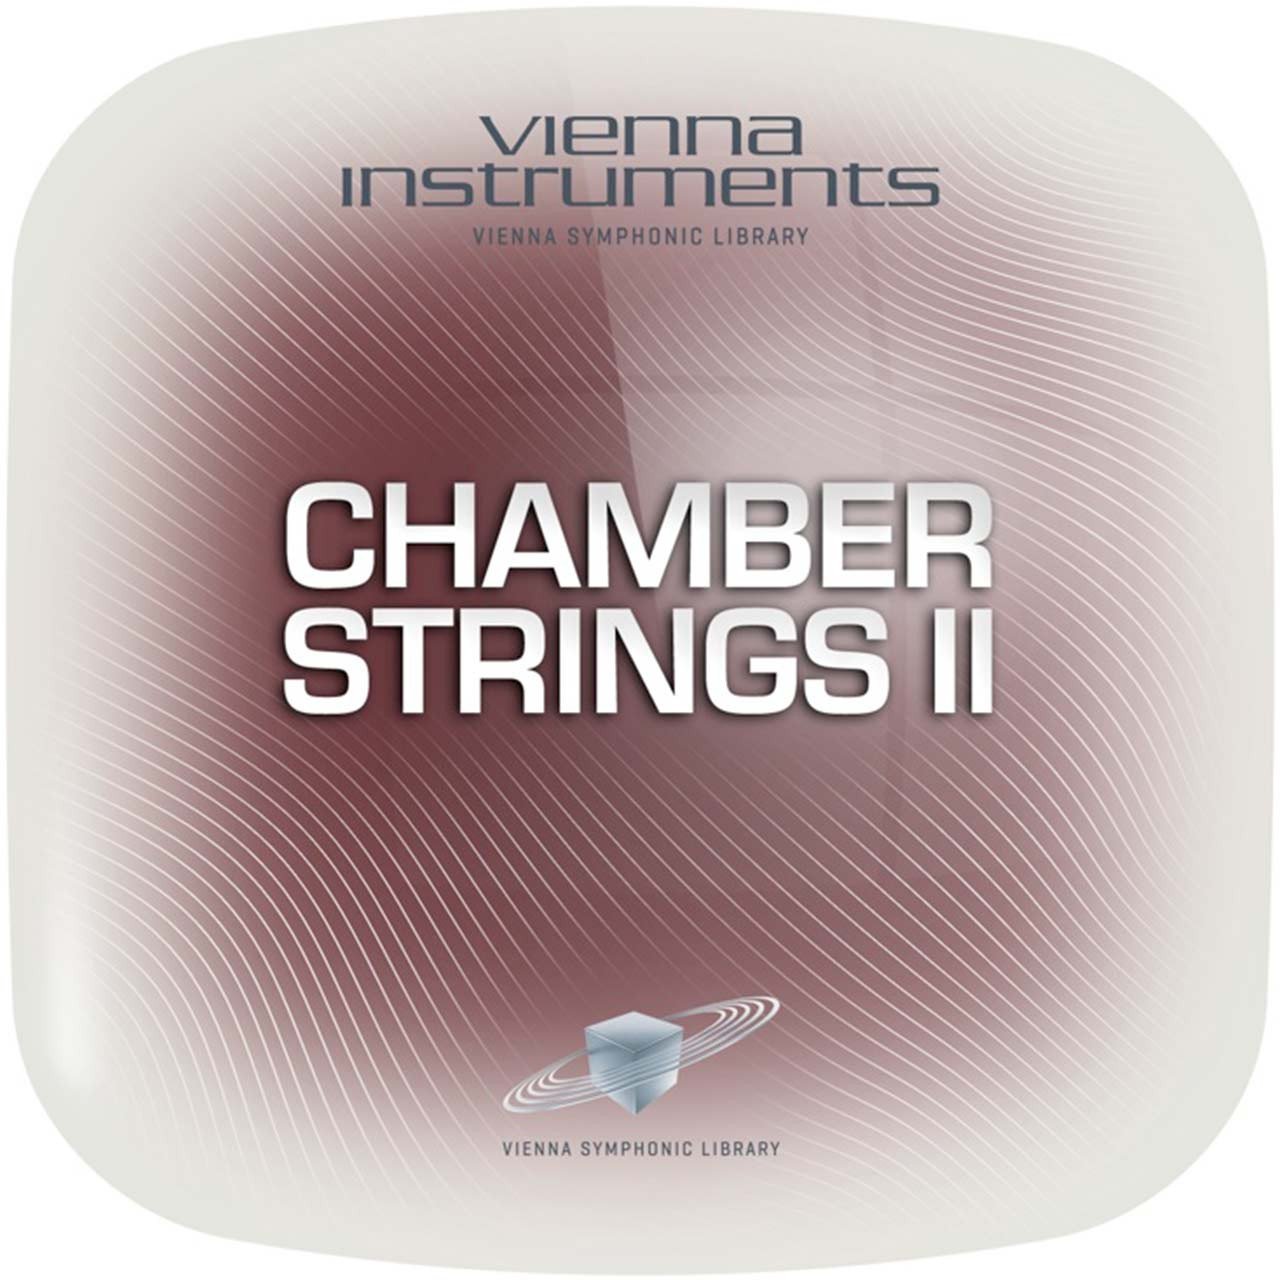 Software Instruments - Vienna Symphonic Library VSL - CHAMBER STRINGS II